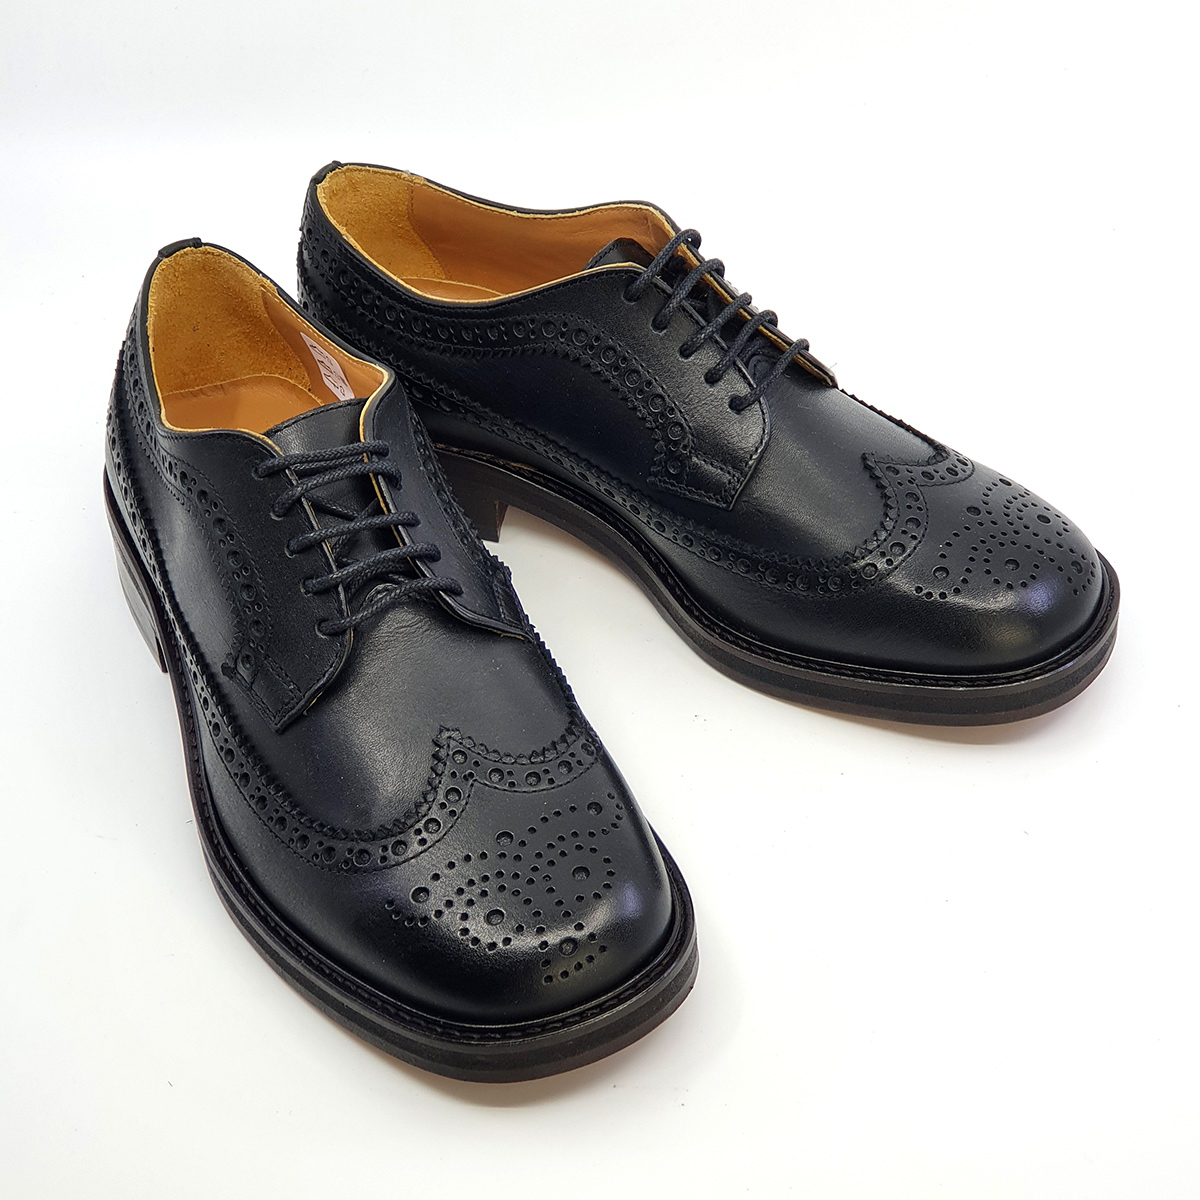 The Charles Ladies Brogue in Black – Northern Soul Ska Style – Mod Shoes